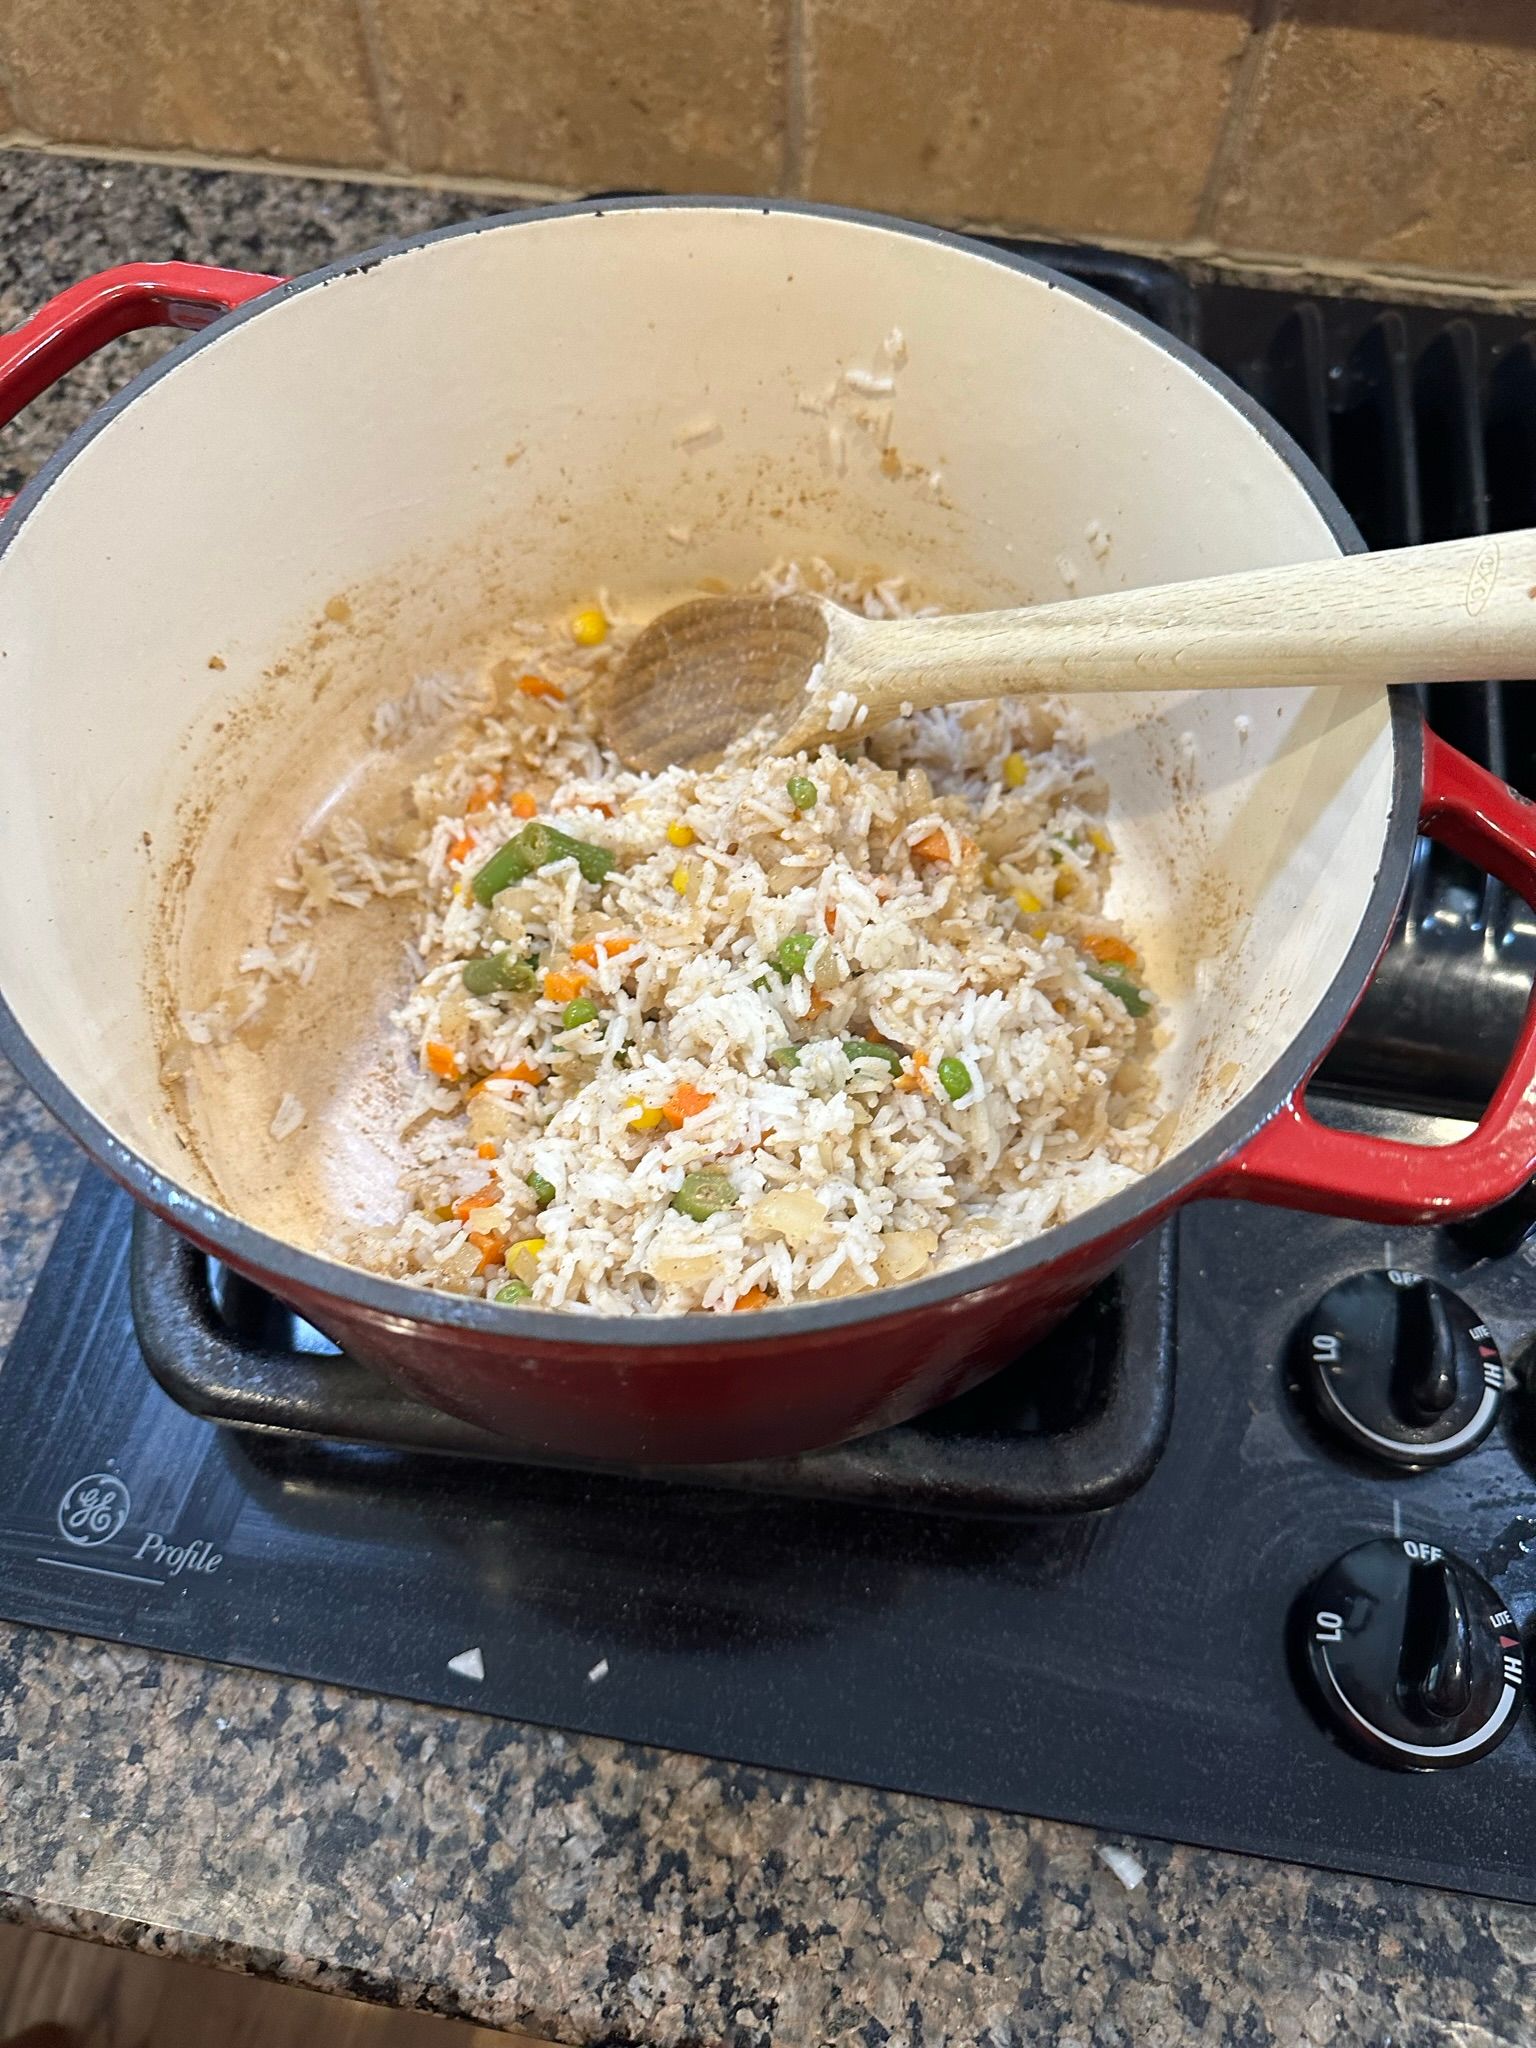 Cooking Up Learning: A Homeschooling Day with Vegetable Biryani and ChatGPT